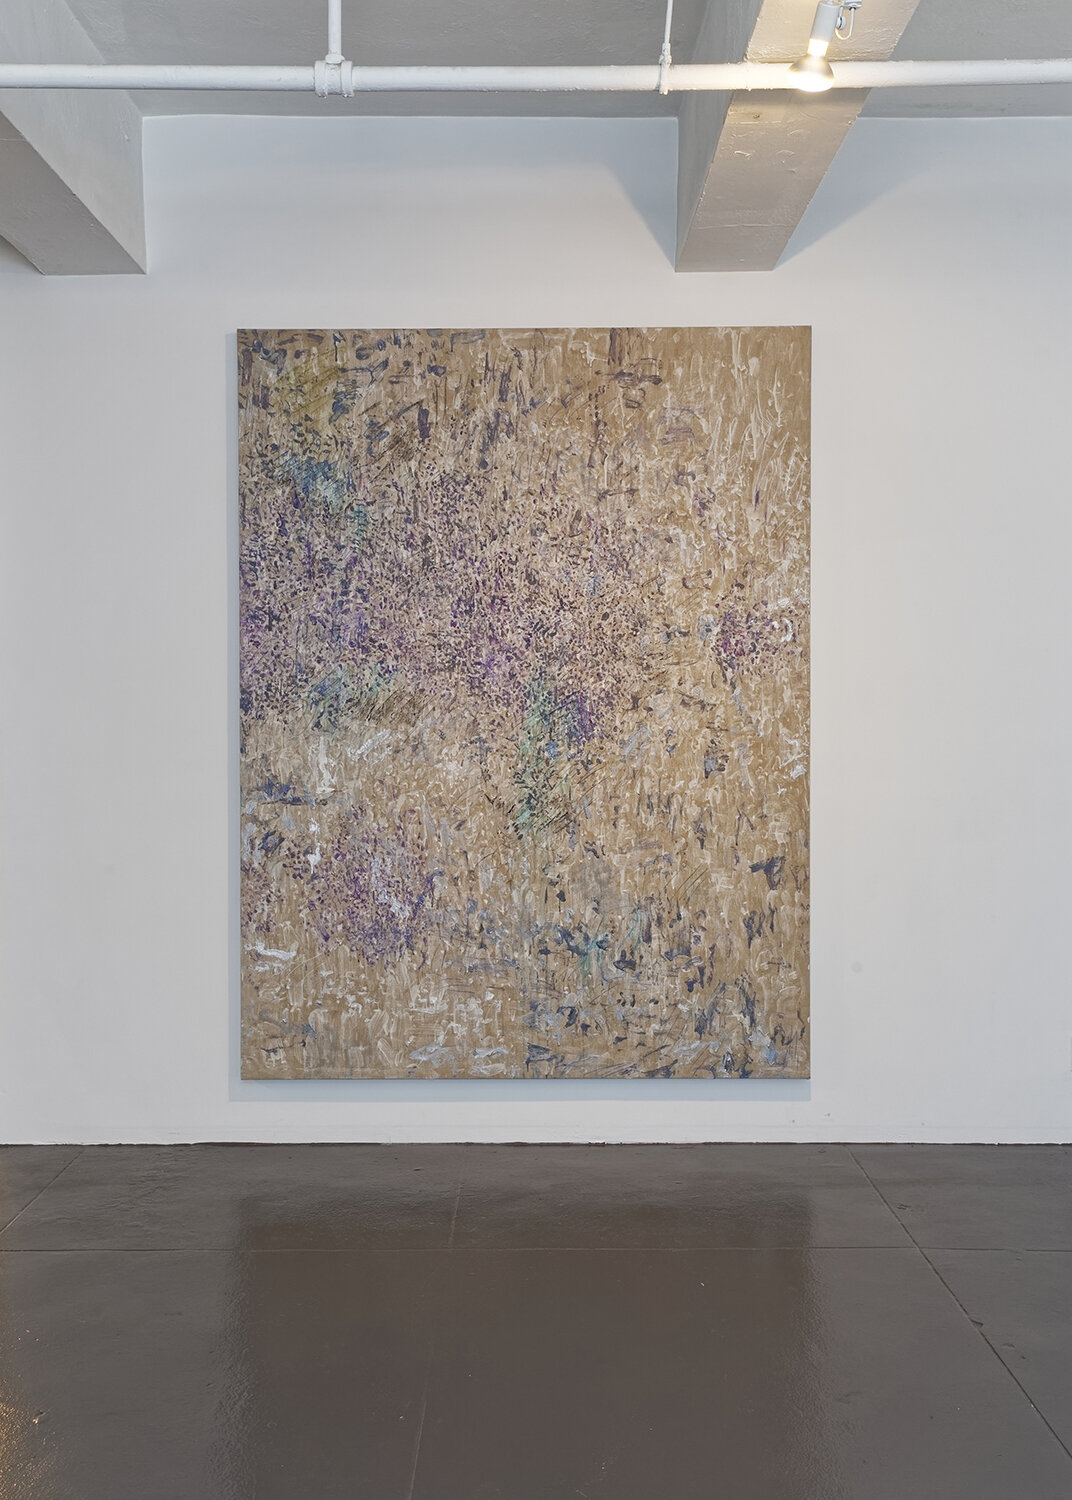  Installation view of  Soft and Wet . Work: Andy Robert,  After Prince , 2019. Photograph by Matt Vicari 